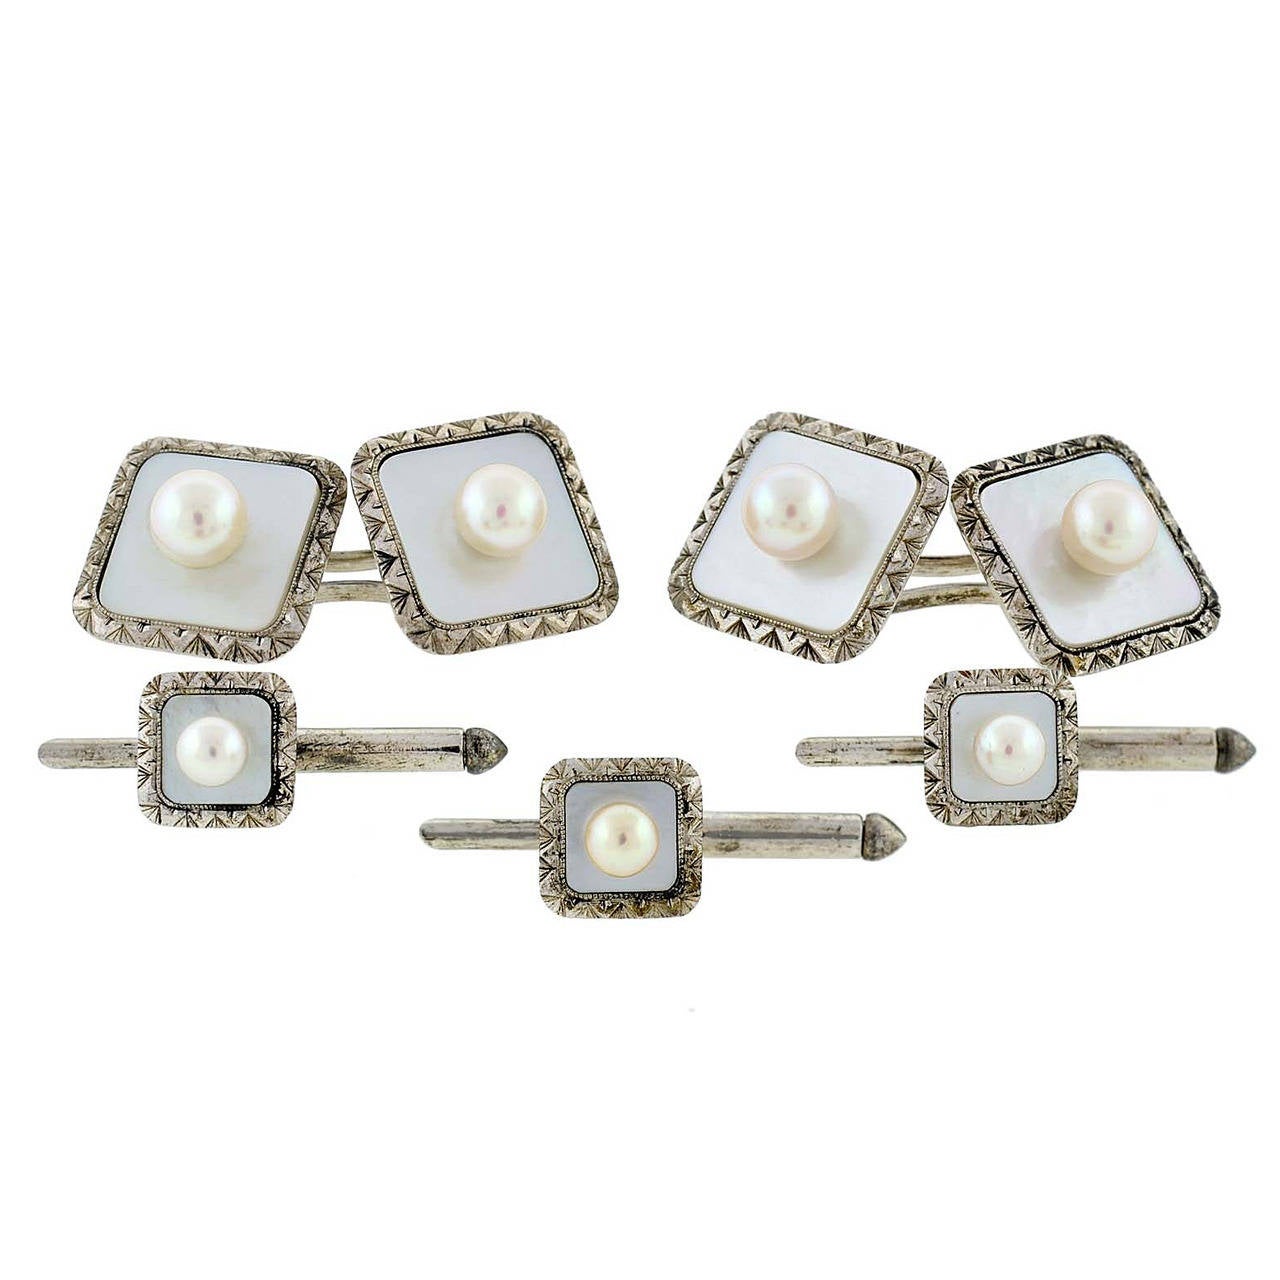 Mikimoto Mother of Pearl and Pearl Cufflink Set